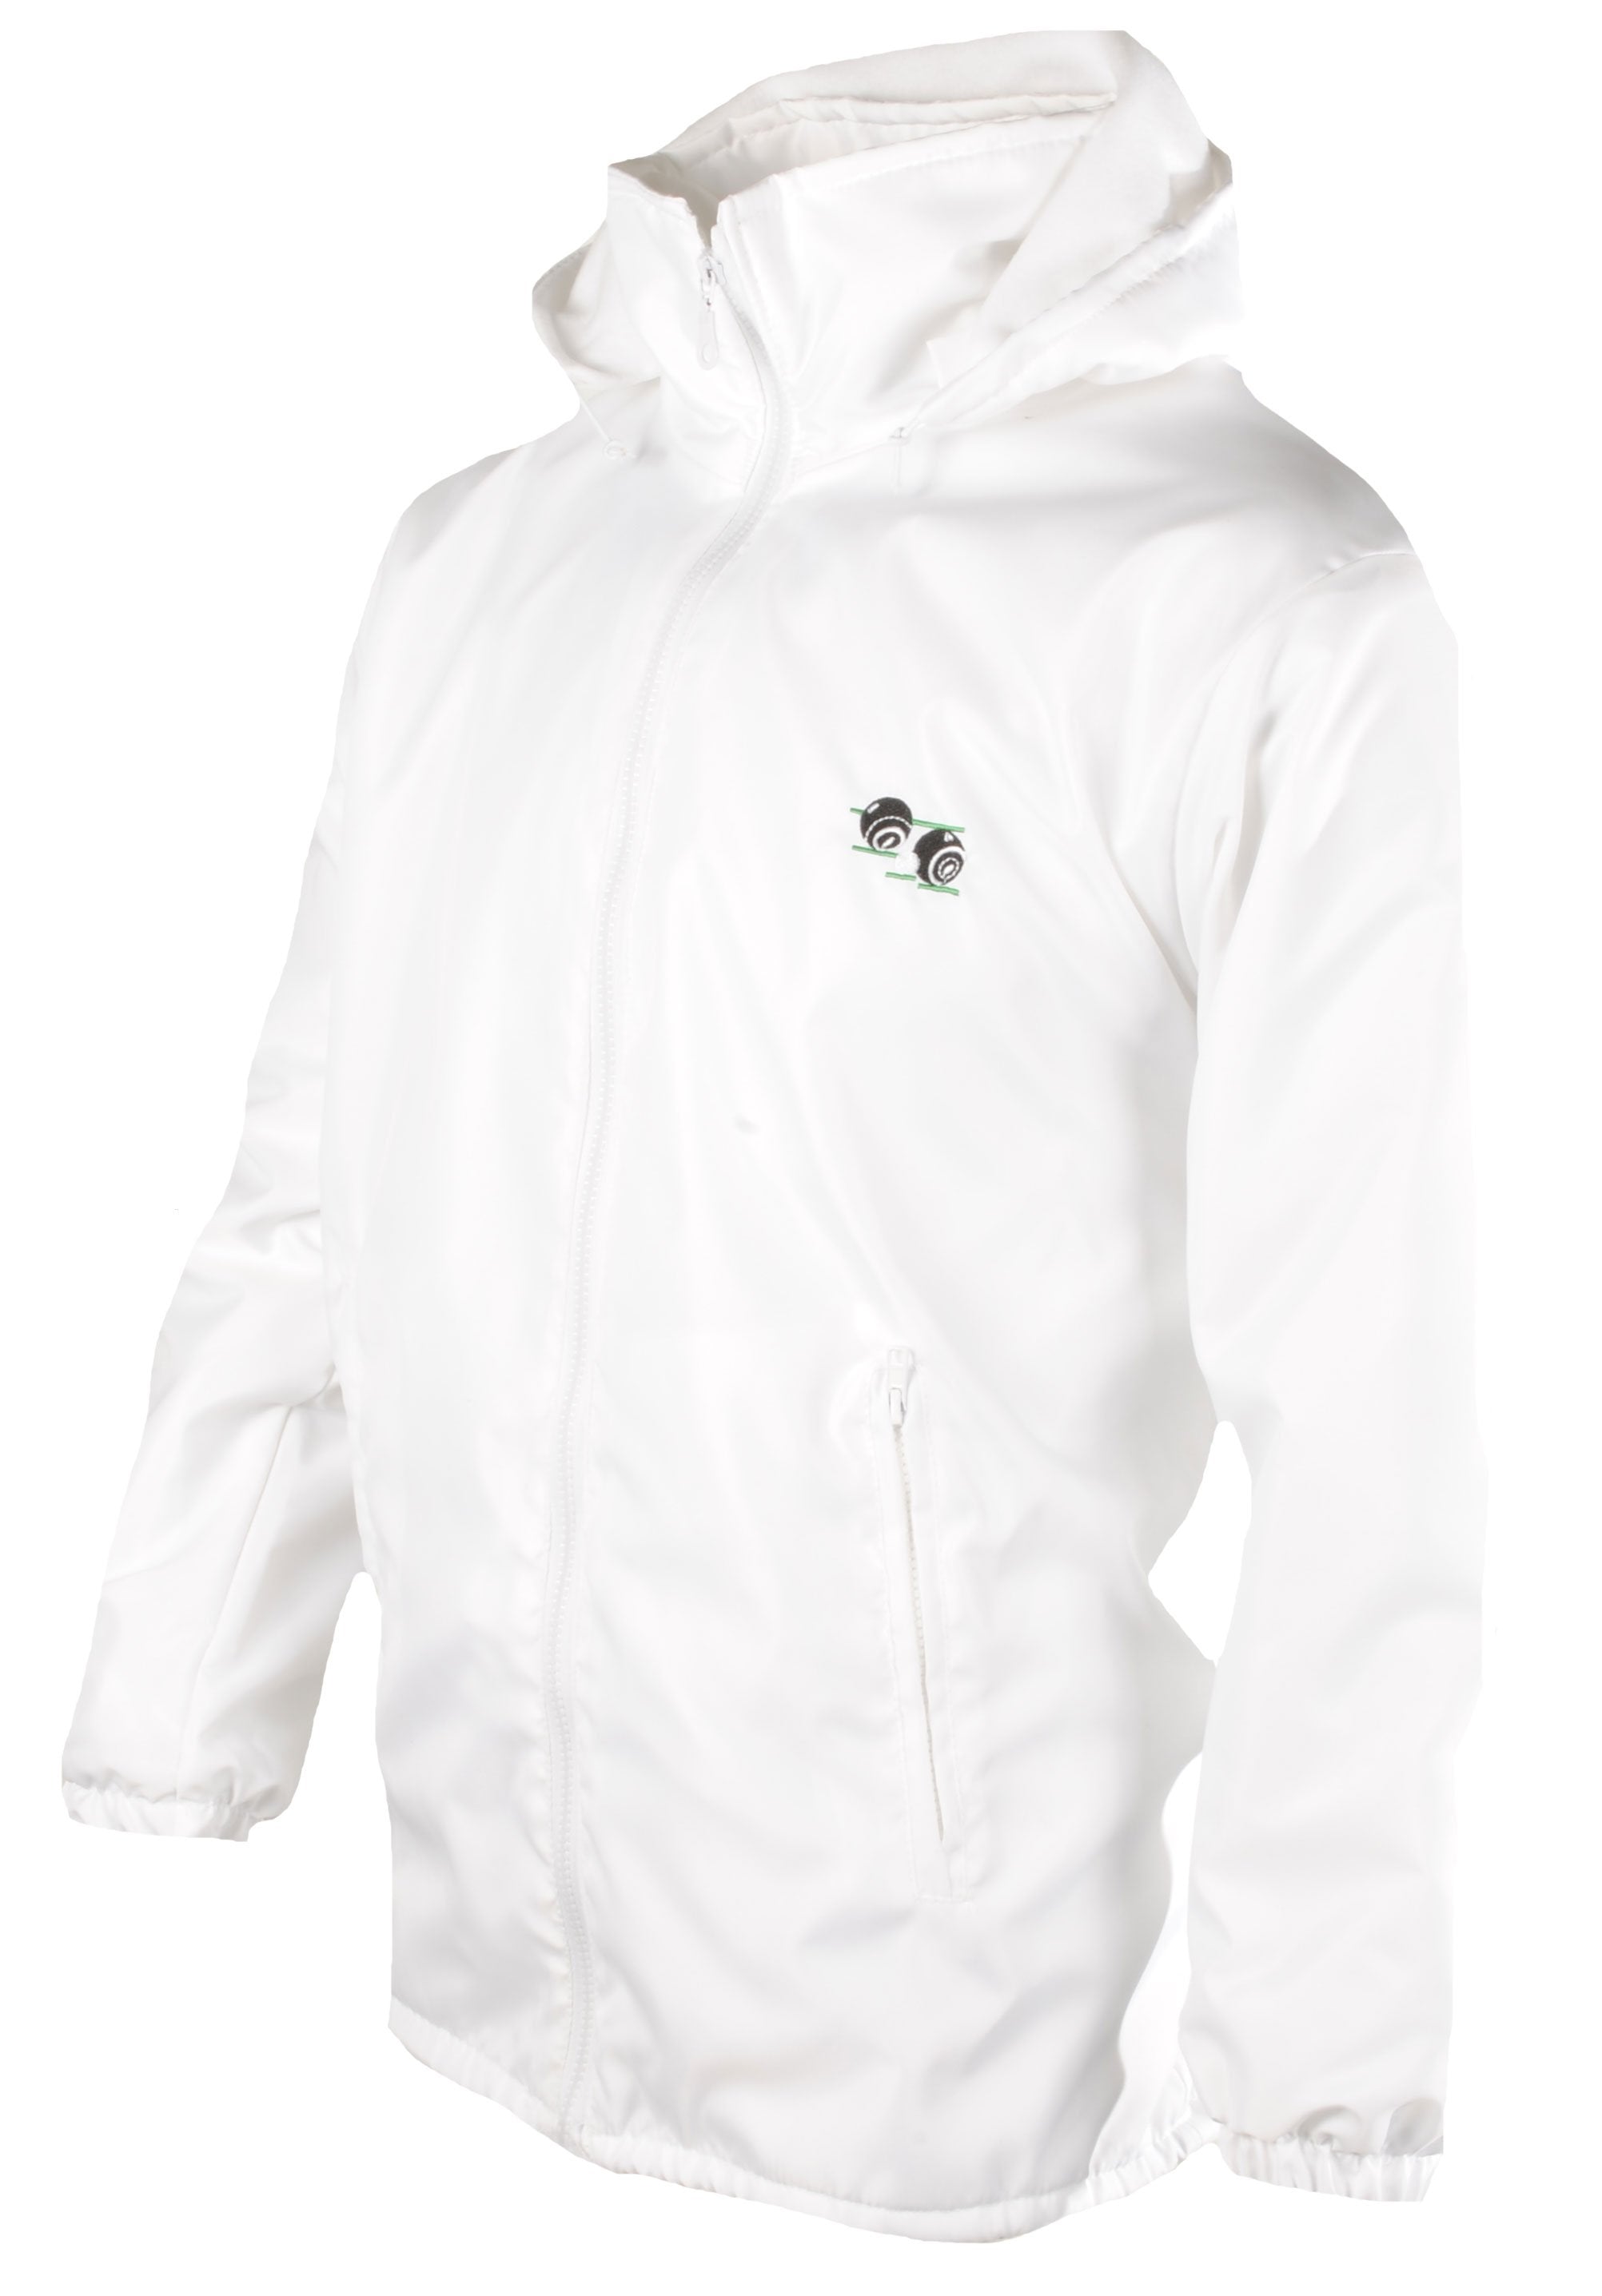 Designer Fleece Lined Hooded Bowling Jackets - White